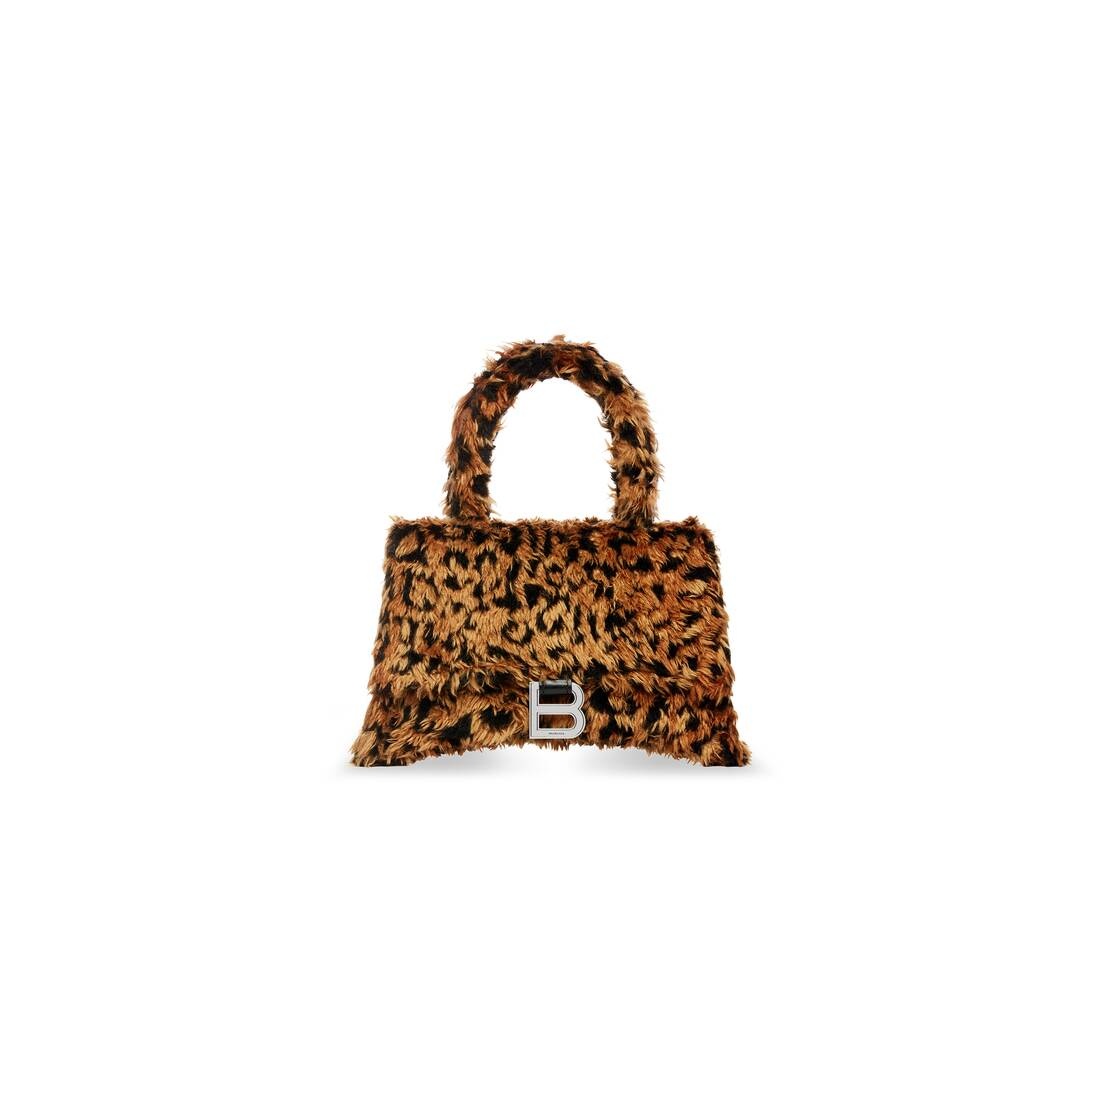 Women's Hourglass Small Handbag With Strap With Leopard Print in Beige - 1